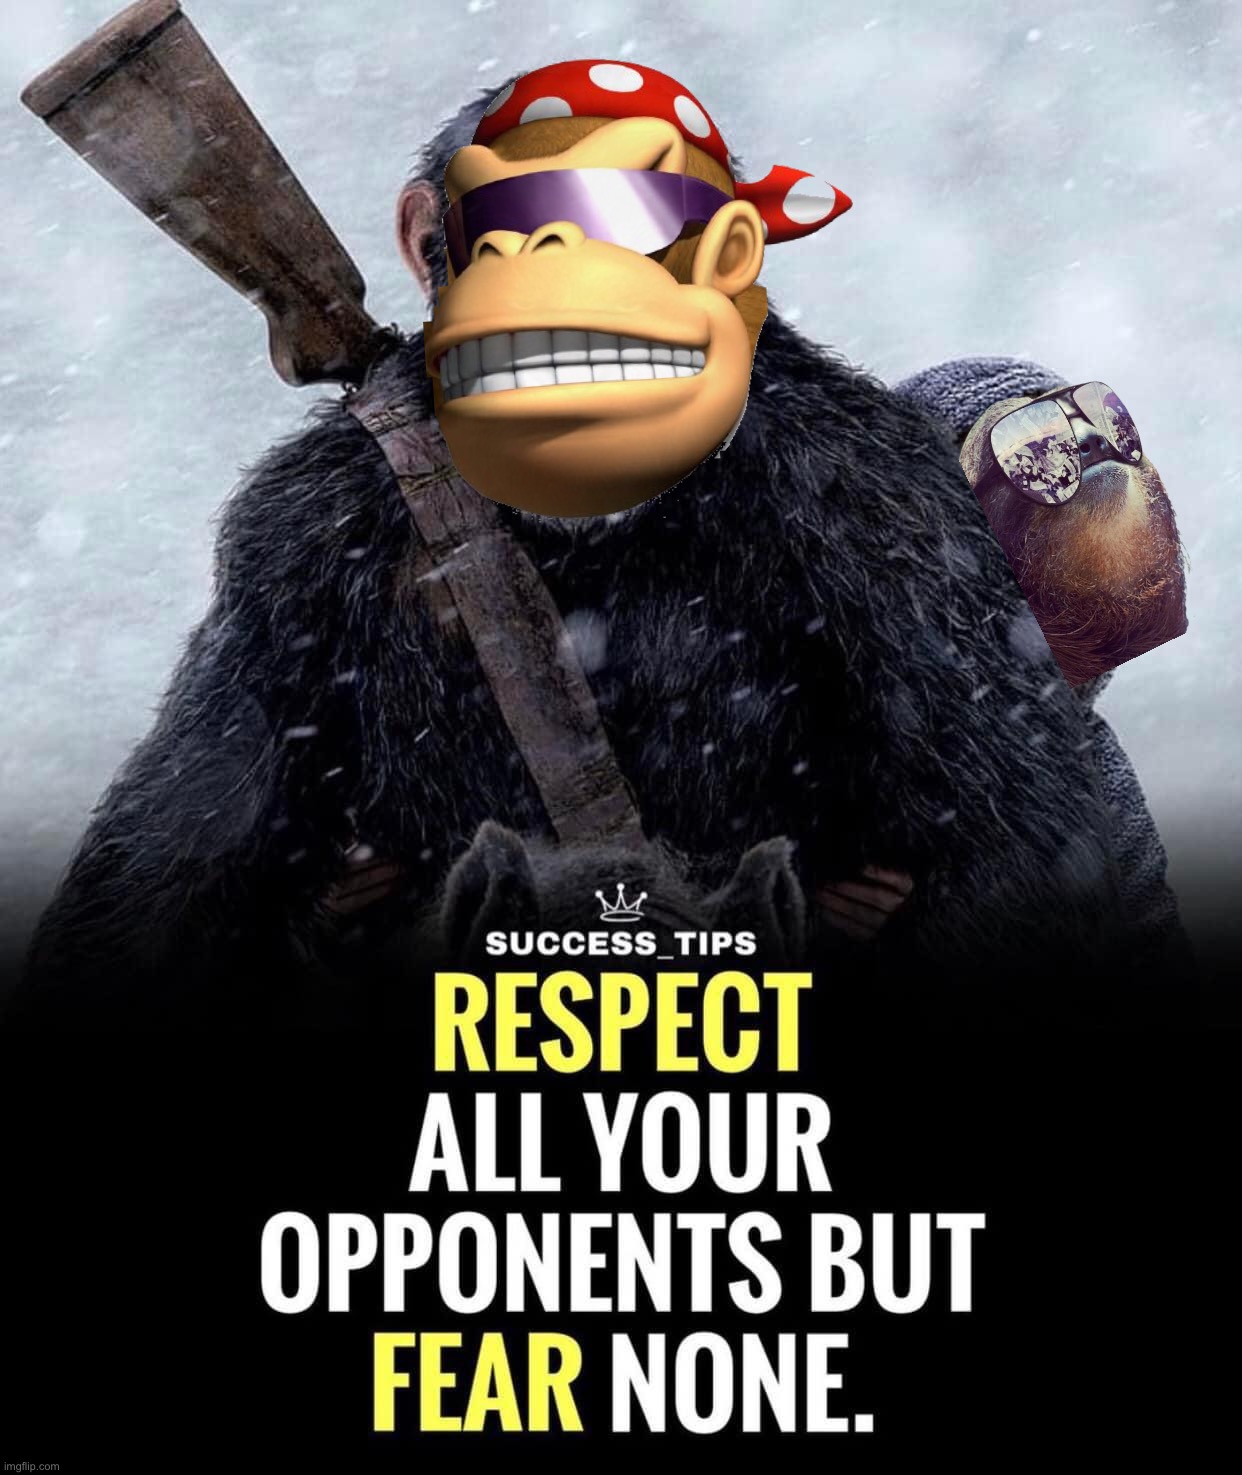 ••• Reespekt the Monke ••• | image tagged in respect all your opponents but fear none,reespekt,the,monke,vote,common sense party | made w/ Imgflip meme maker